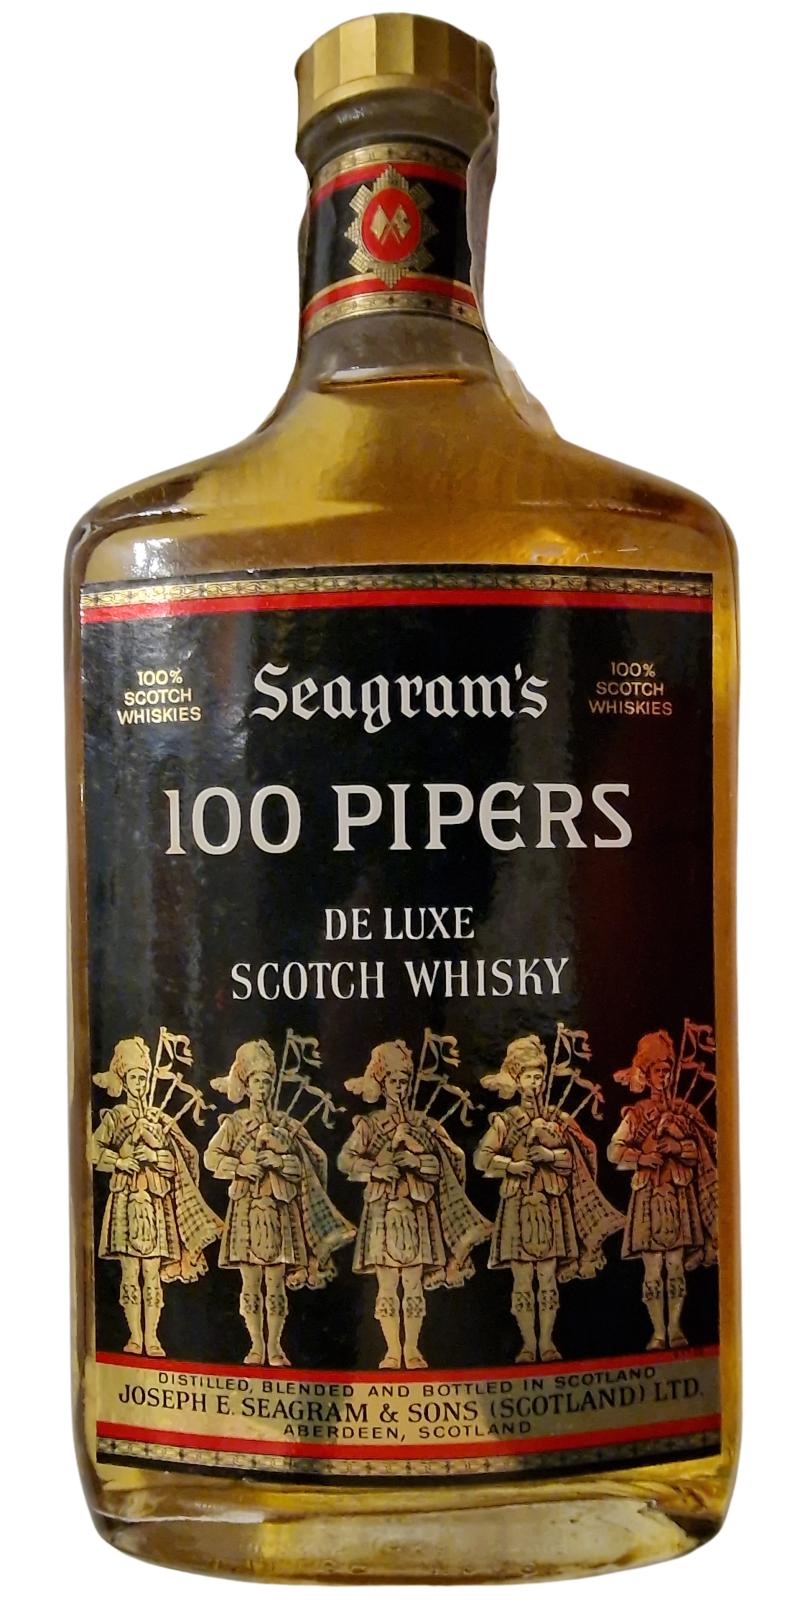 100 Pipers De Luxe Scotch Whisky